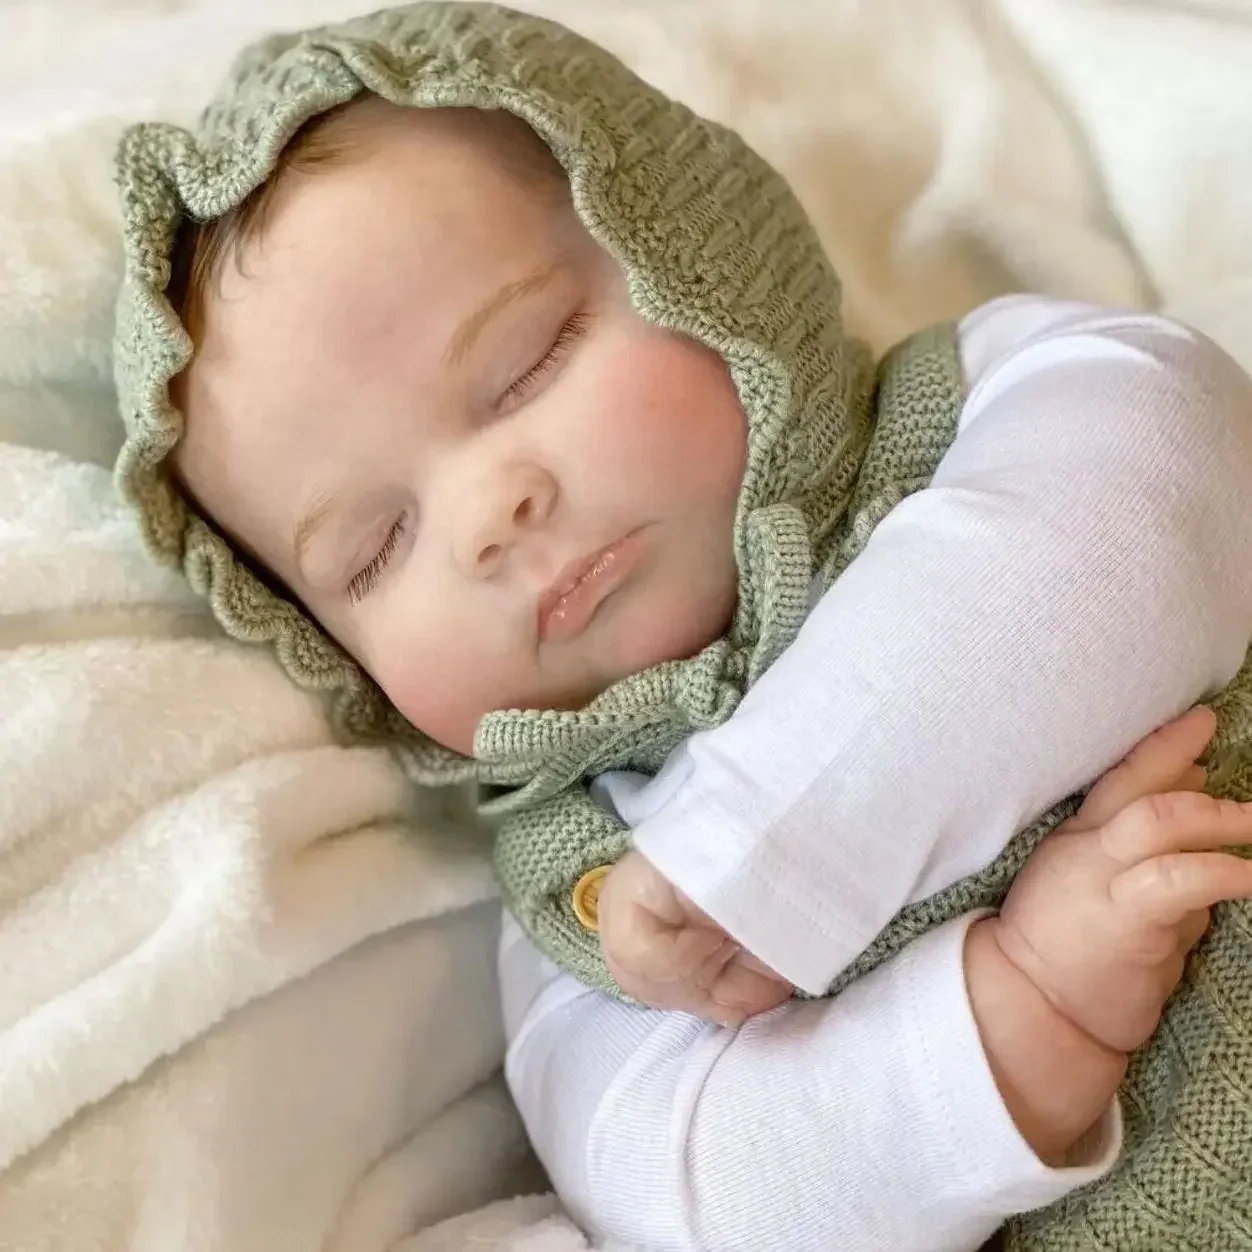 

BZDOLL 60 CM 24 Inch Realistic Soft Silicone Reborn Baby Sleeping Doll With Hand-painted 3D Skin and Vascular Vein Child Gift